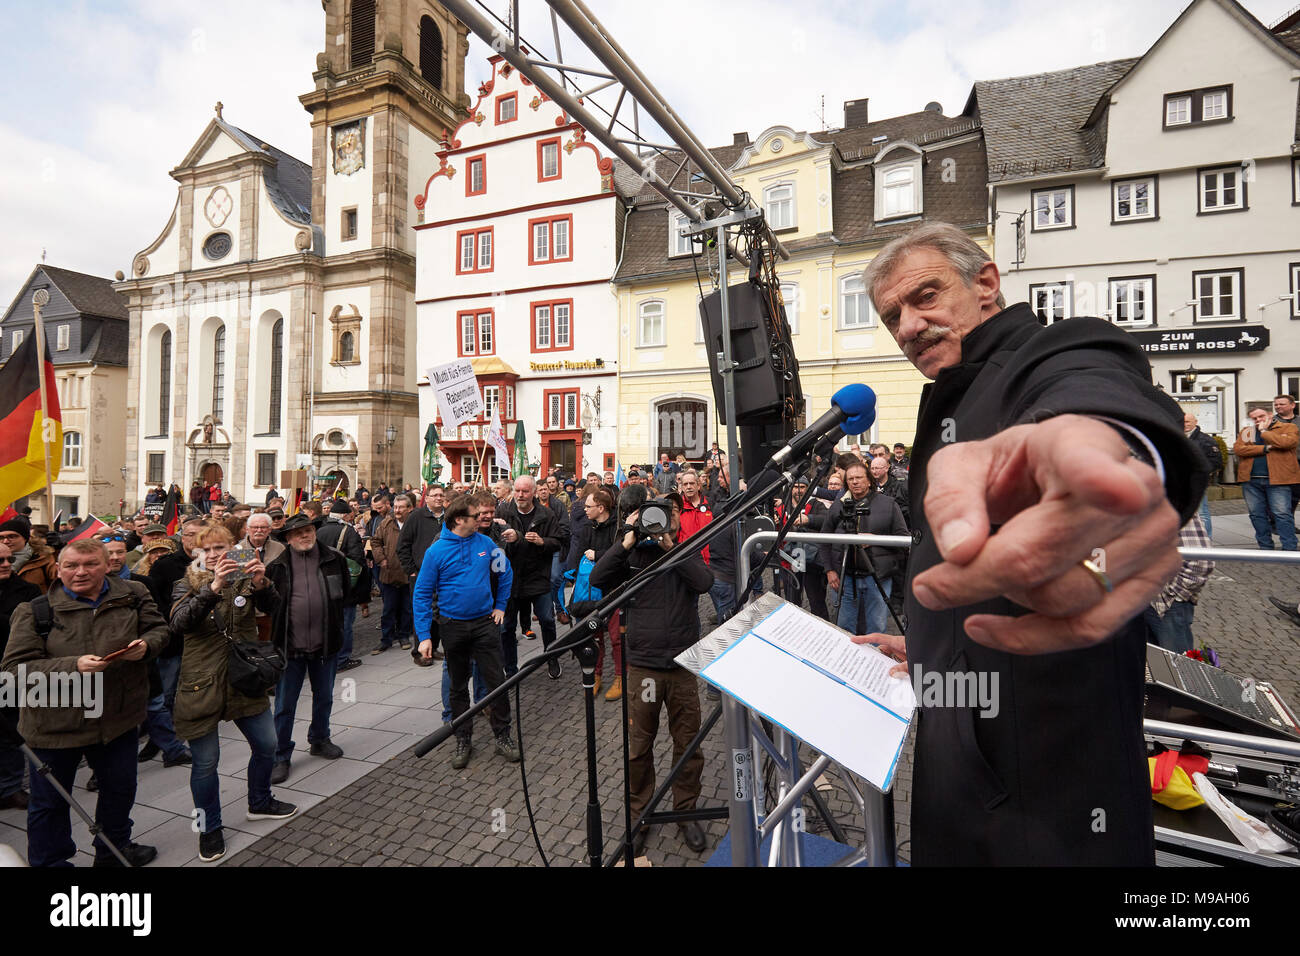 24 March 2018, Germany, Hachenburg: Uwe Junge, chairman of the AfD's fraction in the Rhineland-Palatinate Landtag (State Legislature) speaking during an AfD rally protesting the construction of a DITIB mosque in Hachenburg. The local DITIB muslim community is currently in the process of building a mosque in the small city in the Westerwald. The Turkish muslim umbrella organisation DITIB is the object of criticism across Germany due to its perceived closeness to the Turkish government. Photo: Thomas Frey/dpa Stock Photo